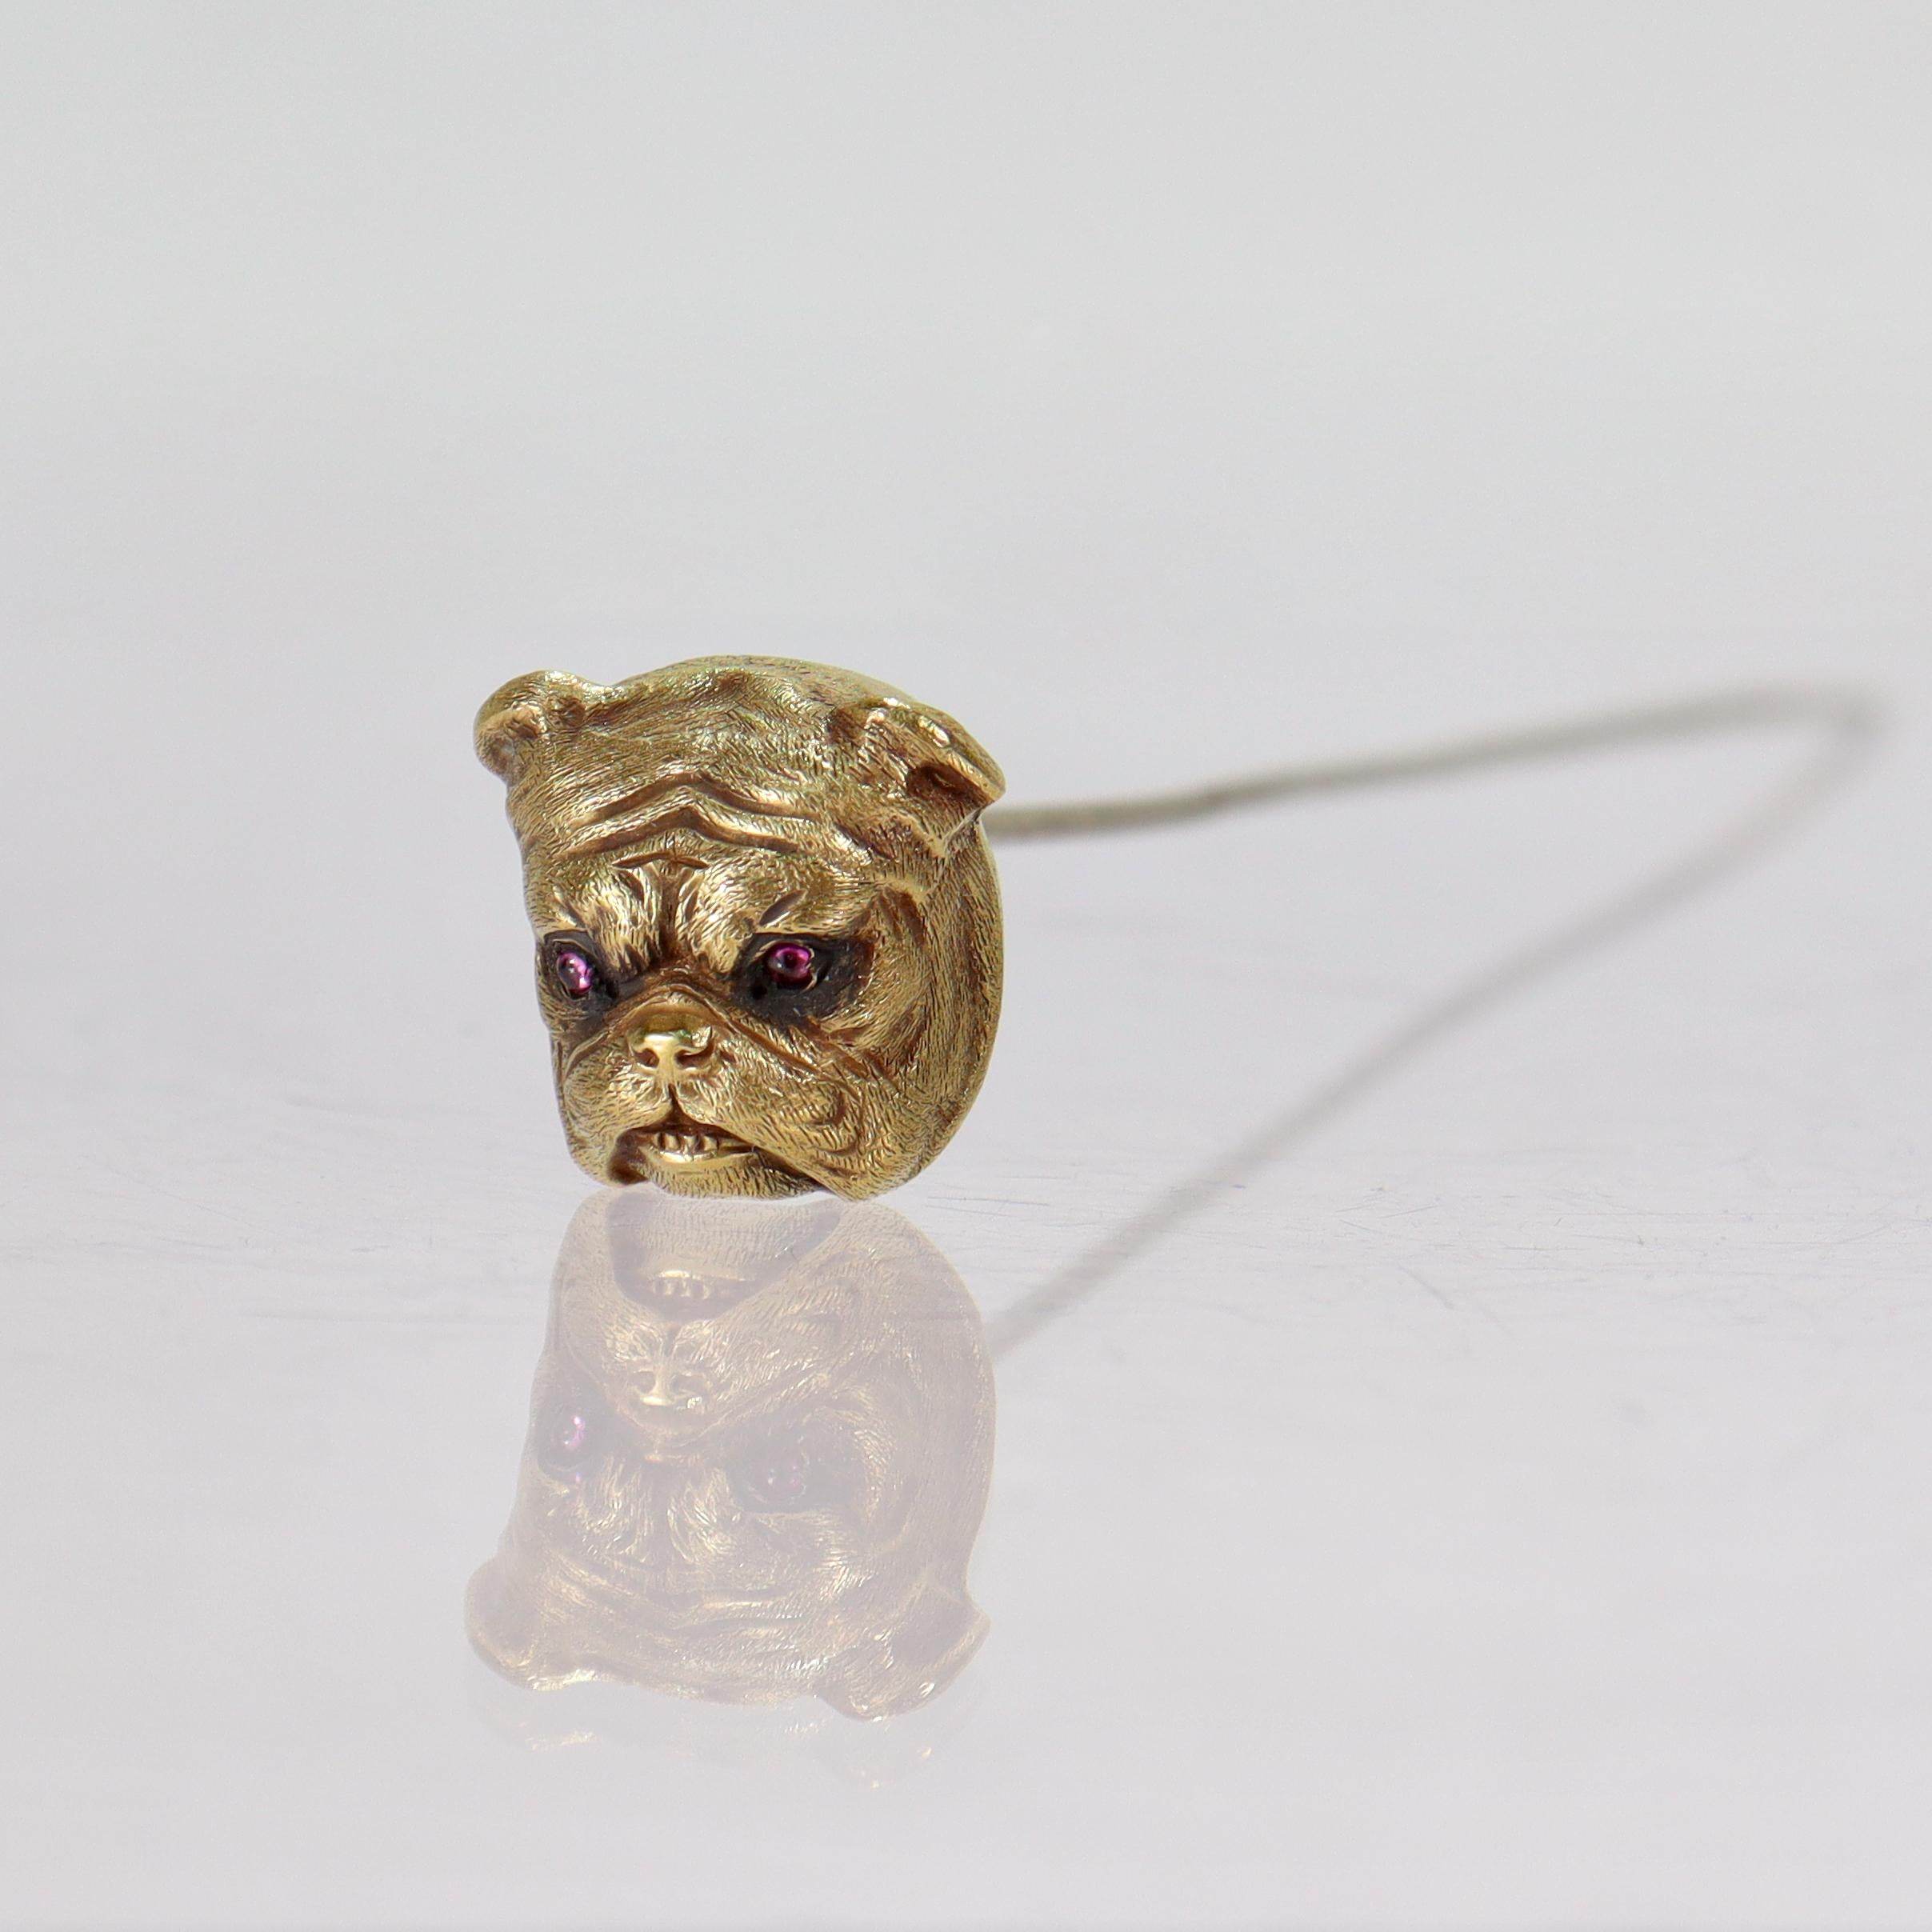 A fine antique 14k gold & ruby hatpin.

By Sloan & Co.

With a figural bulldog top set tiny ruby cabochon eyes.

The pin stem is gold plated.

Simply a great pin for any bulldog lover!

Date:
20th Century

Overall Condition:
It is in overall good,